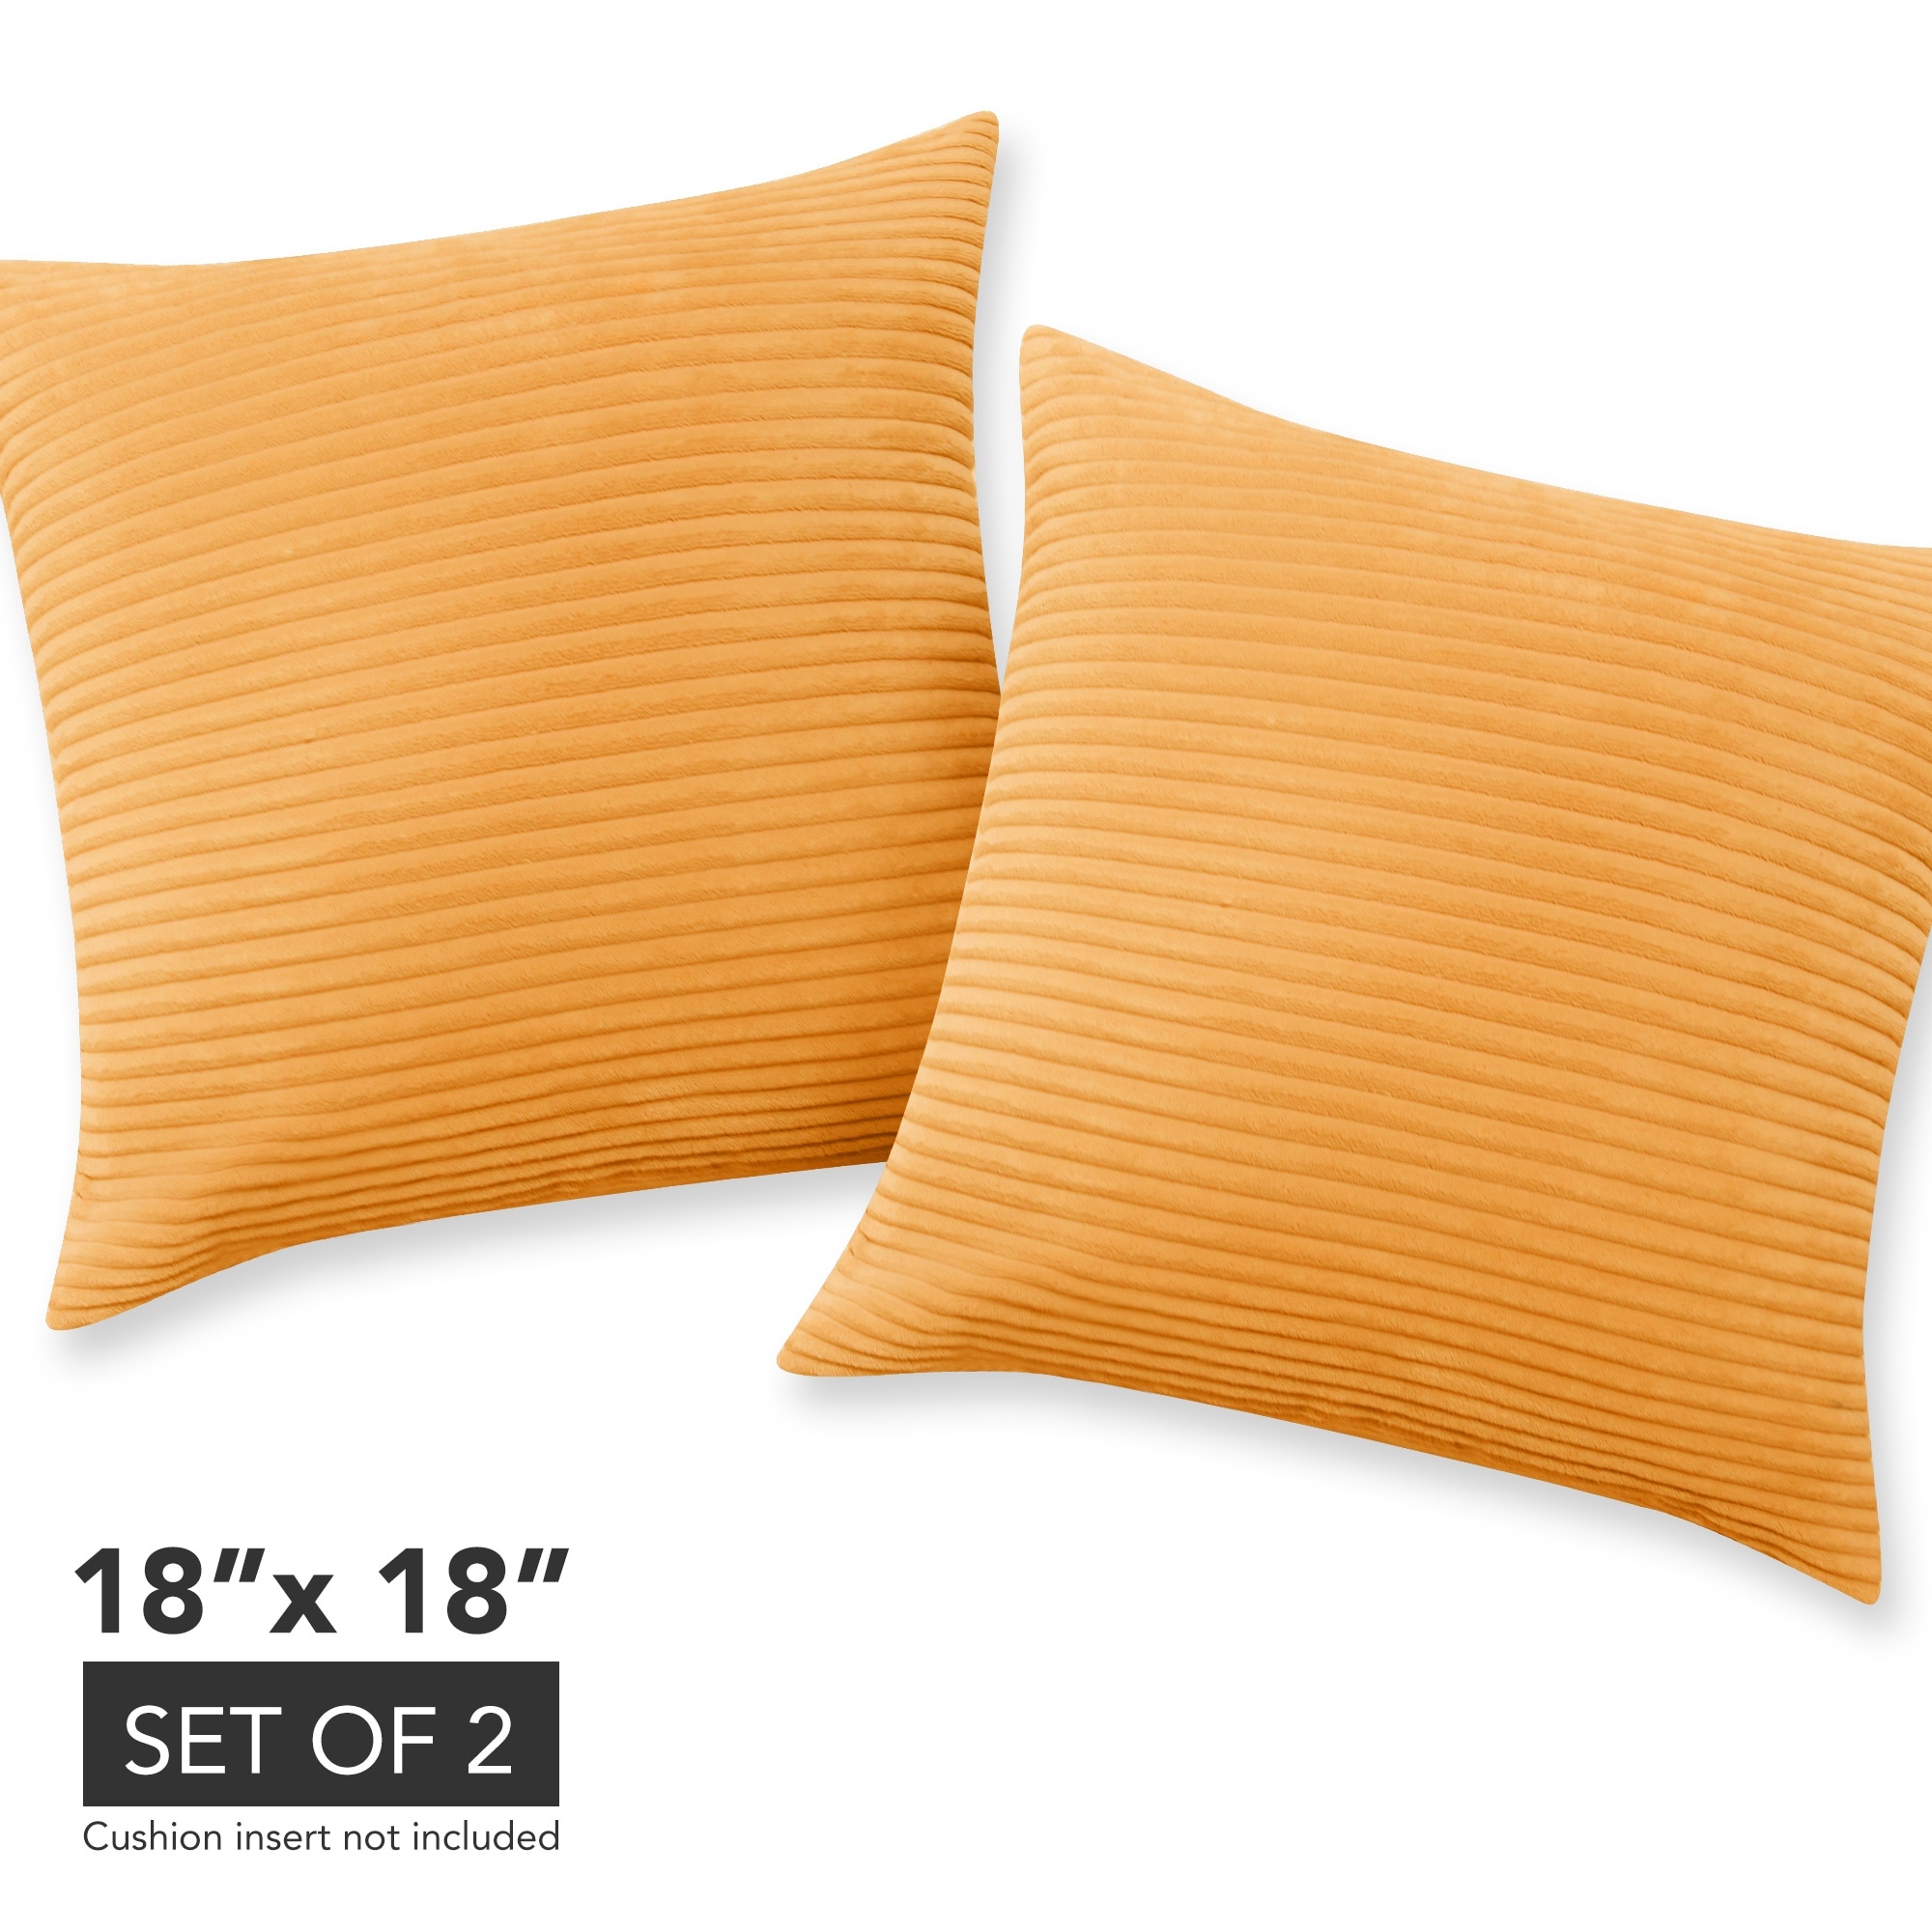 https://ak1.ostkcdn.com/images/products/is/images/direct/ffe3049b26049c5be677406686578af0a8a9d8fc/Deconovo-Corduroy-Throw-Pillow-Covers-with-Stripe-2-Pieces.jpg